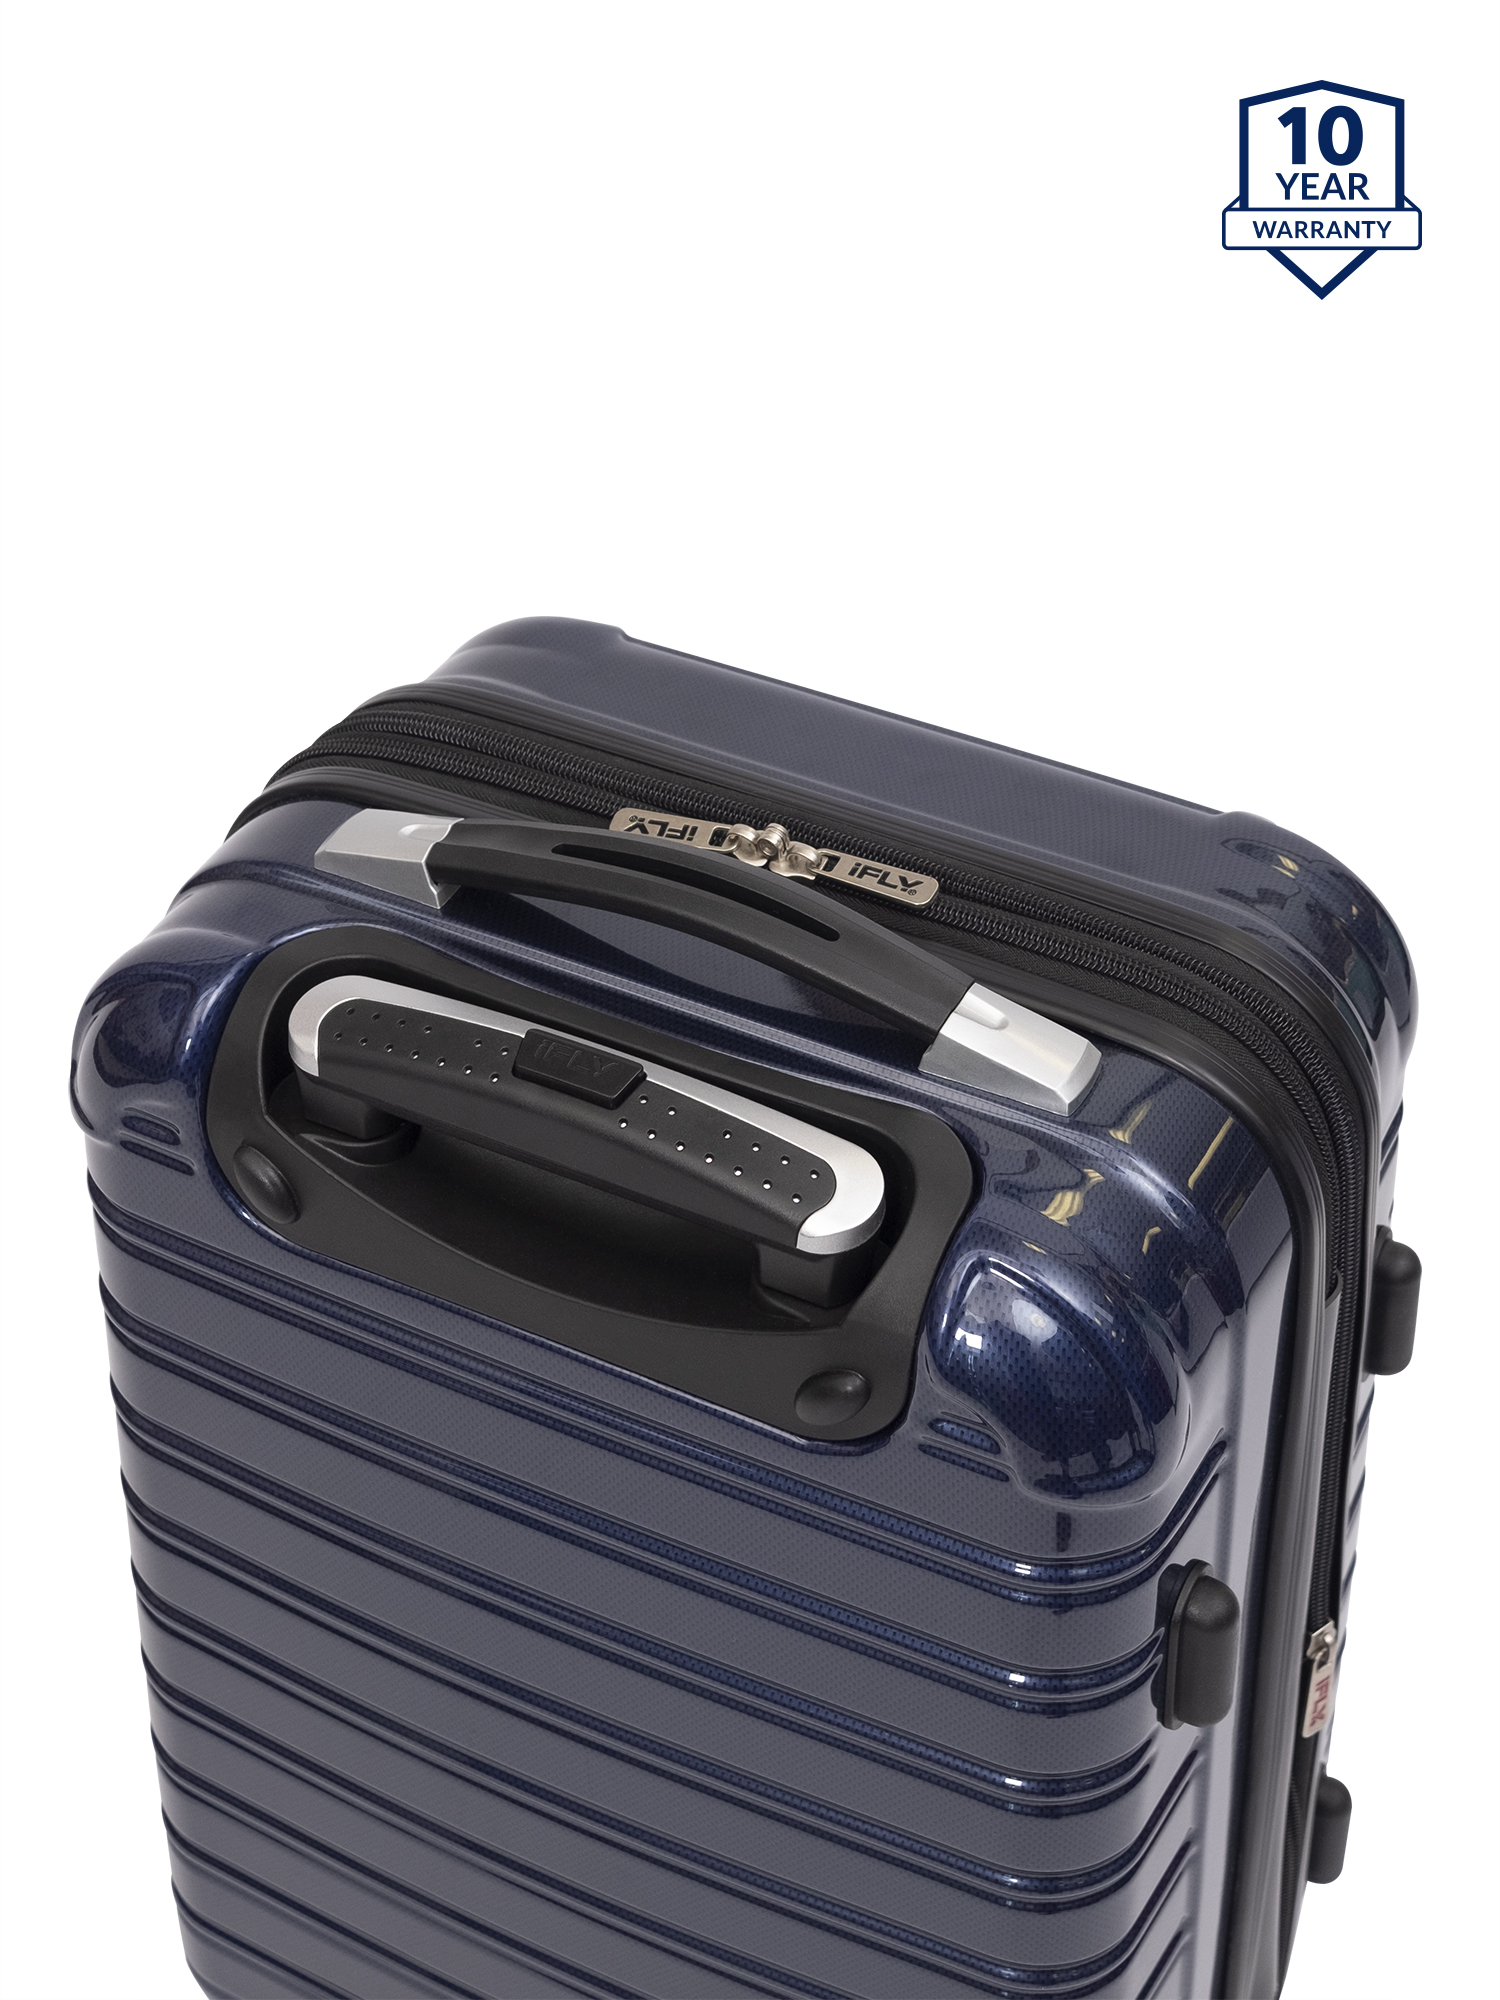 iFLY Online Exclusive Hard Sided Luggage Fibertech 20" & Travel Case - image 3 of 9